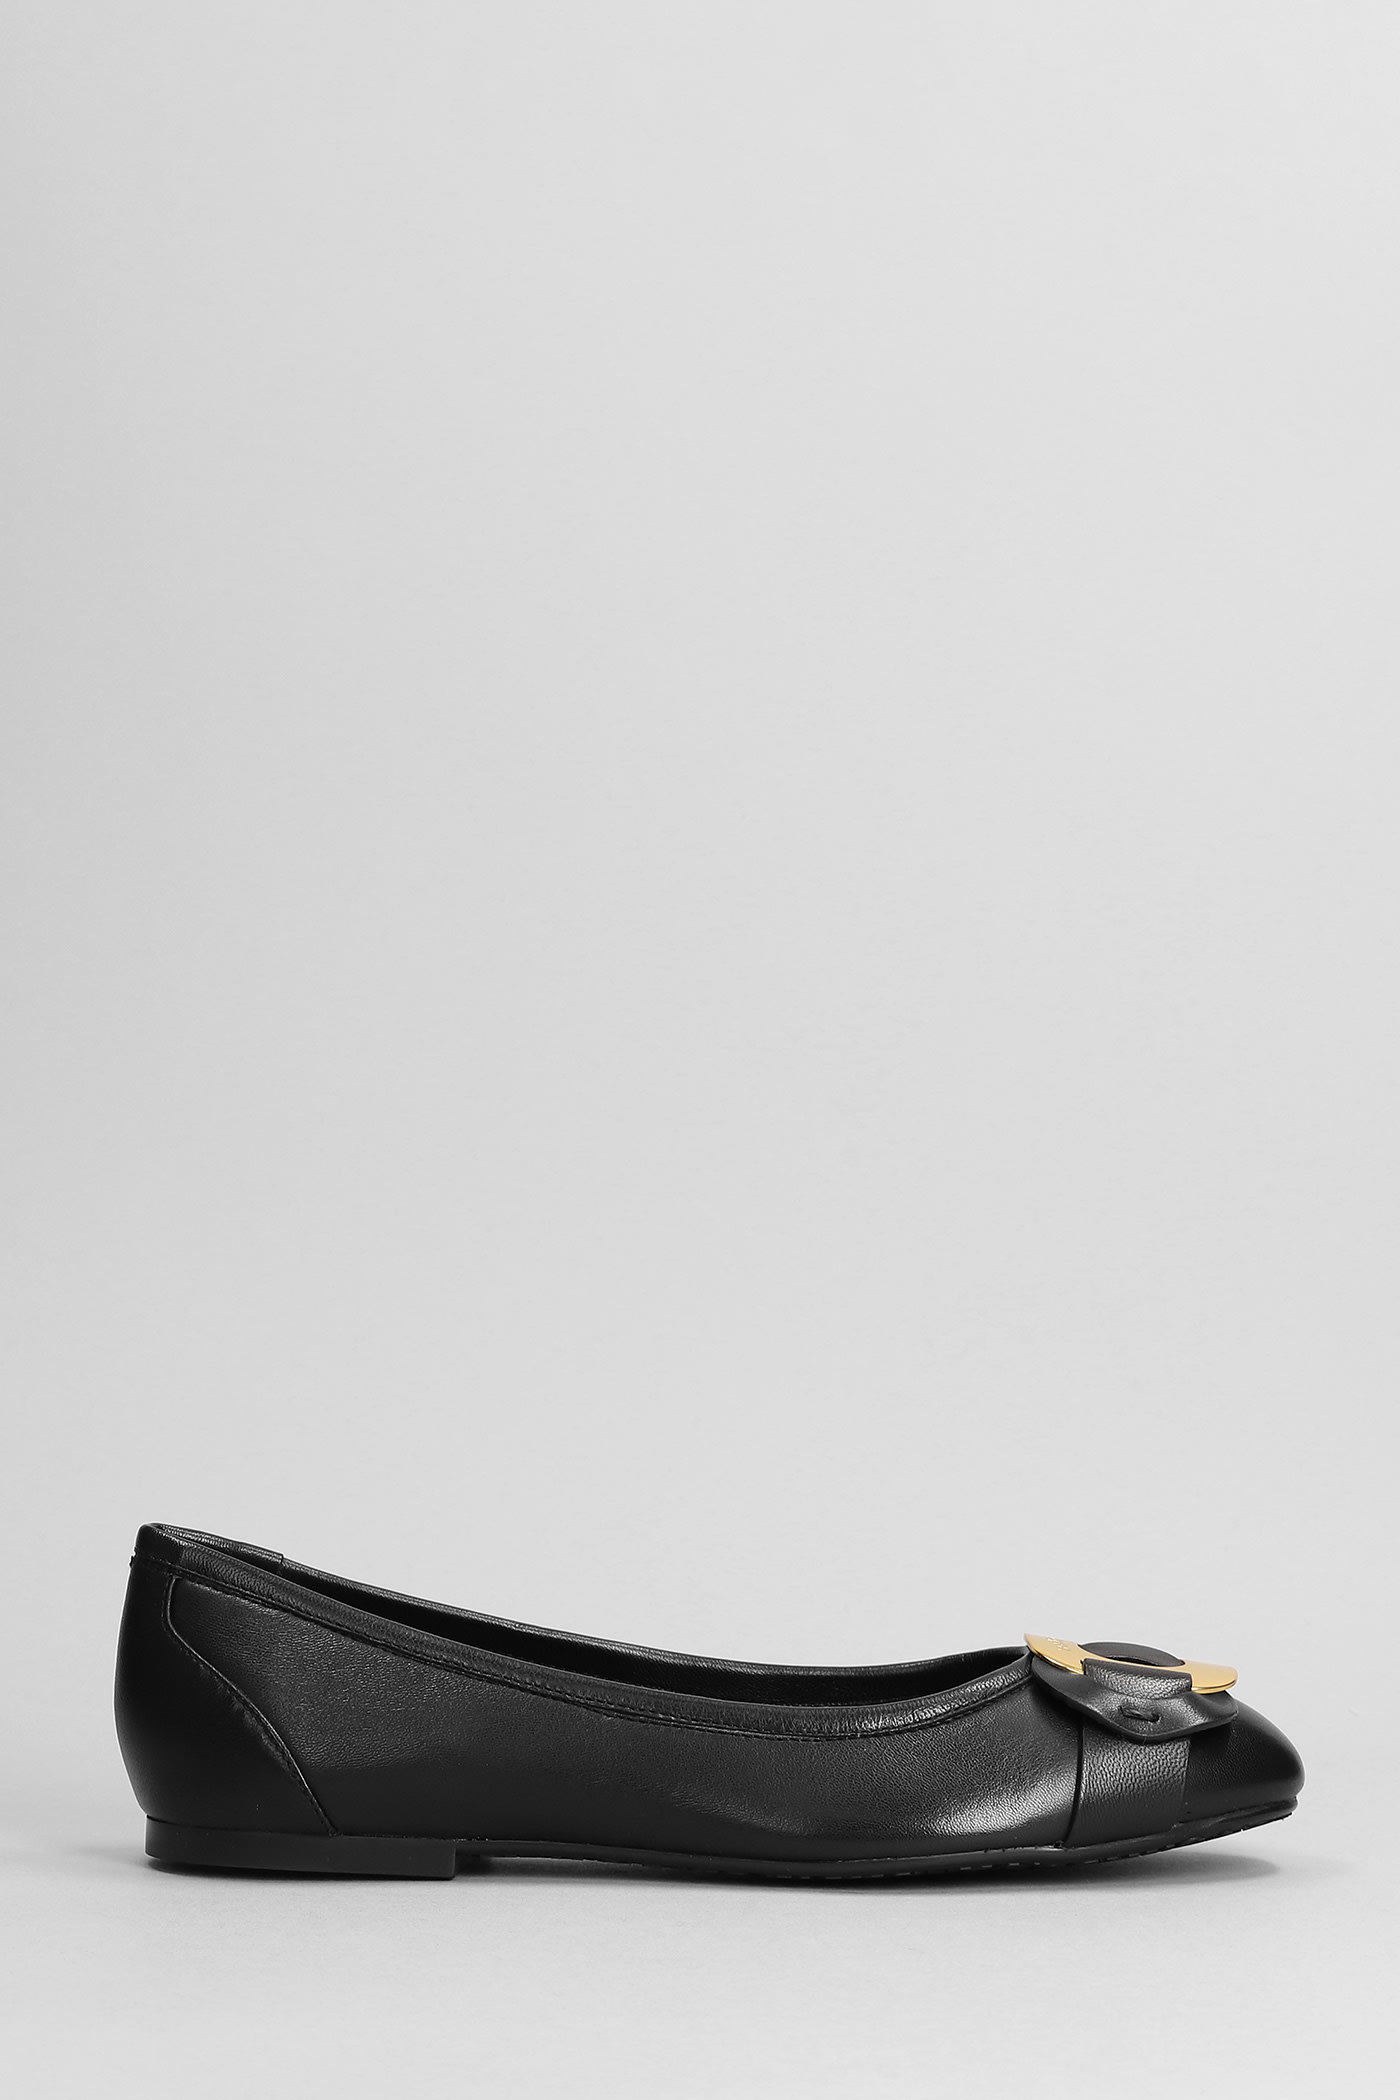 SEE BY CHLOÉ CHANY BALLET FLATS IN BLACK LEATHER